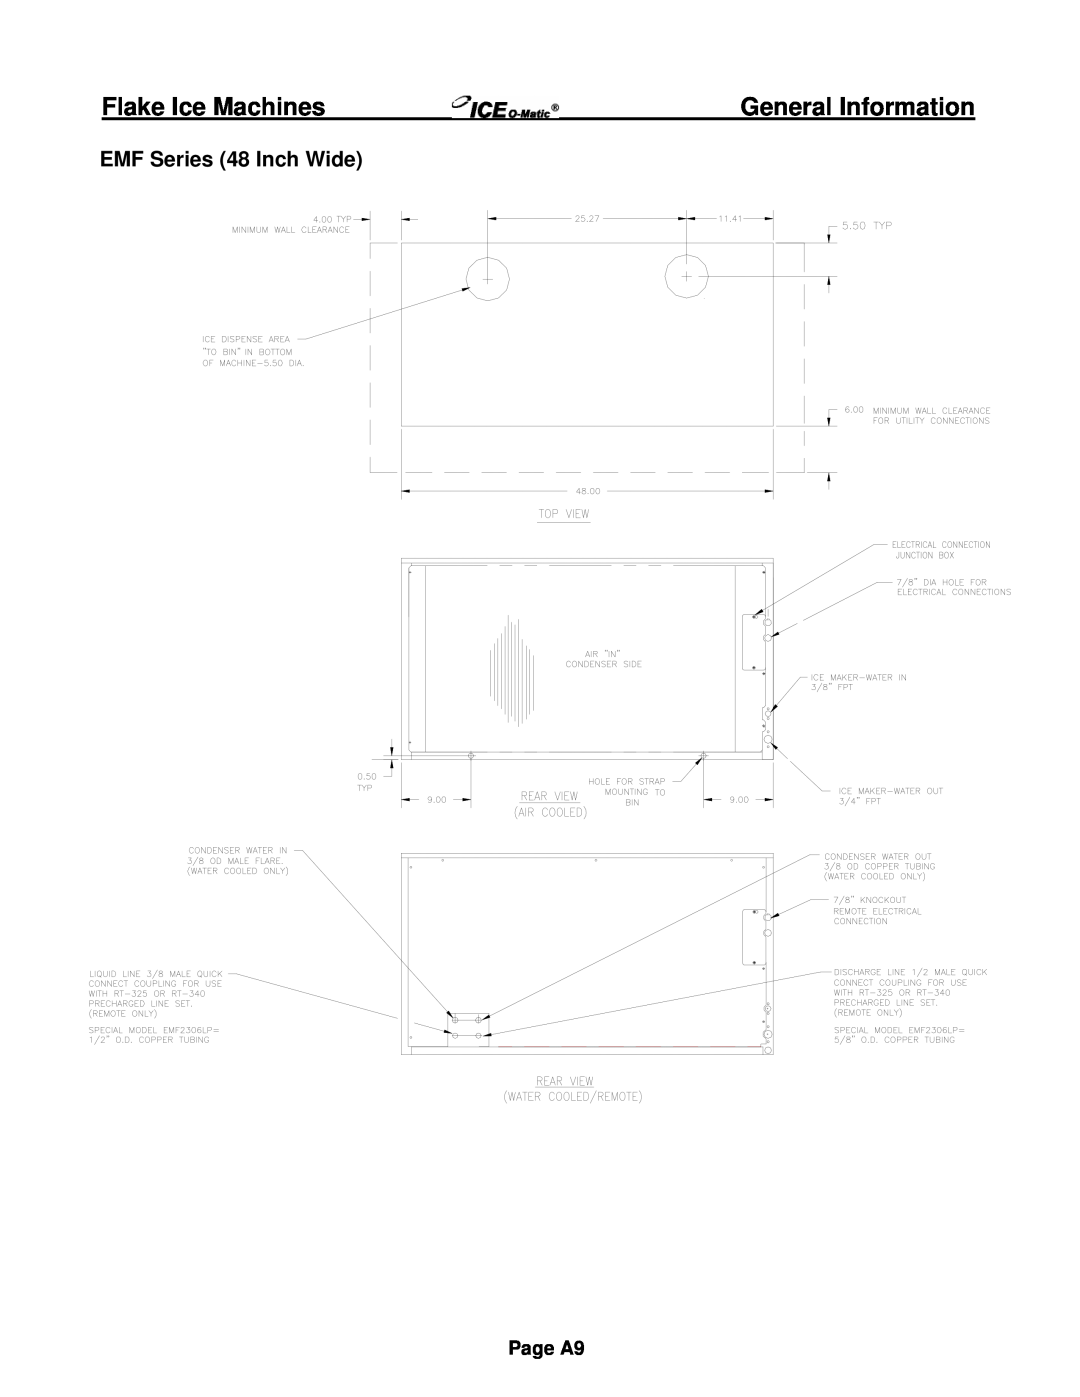 Ice-O-Matic EF Series installation manual General Information, EMF Series 48 Inch Wide, Page A9 